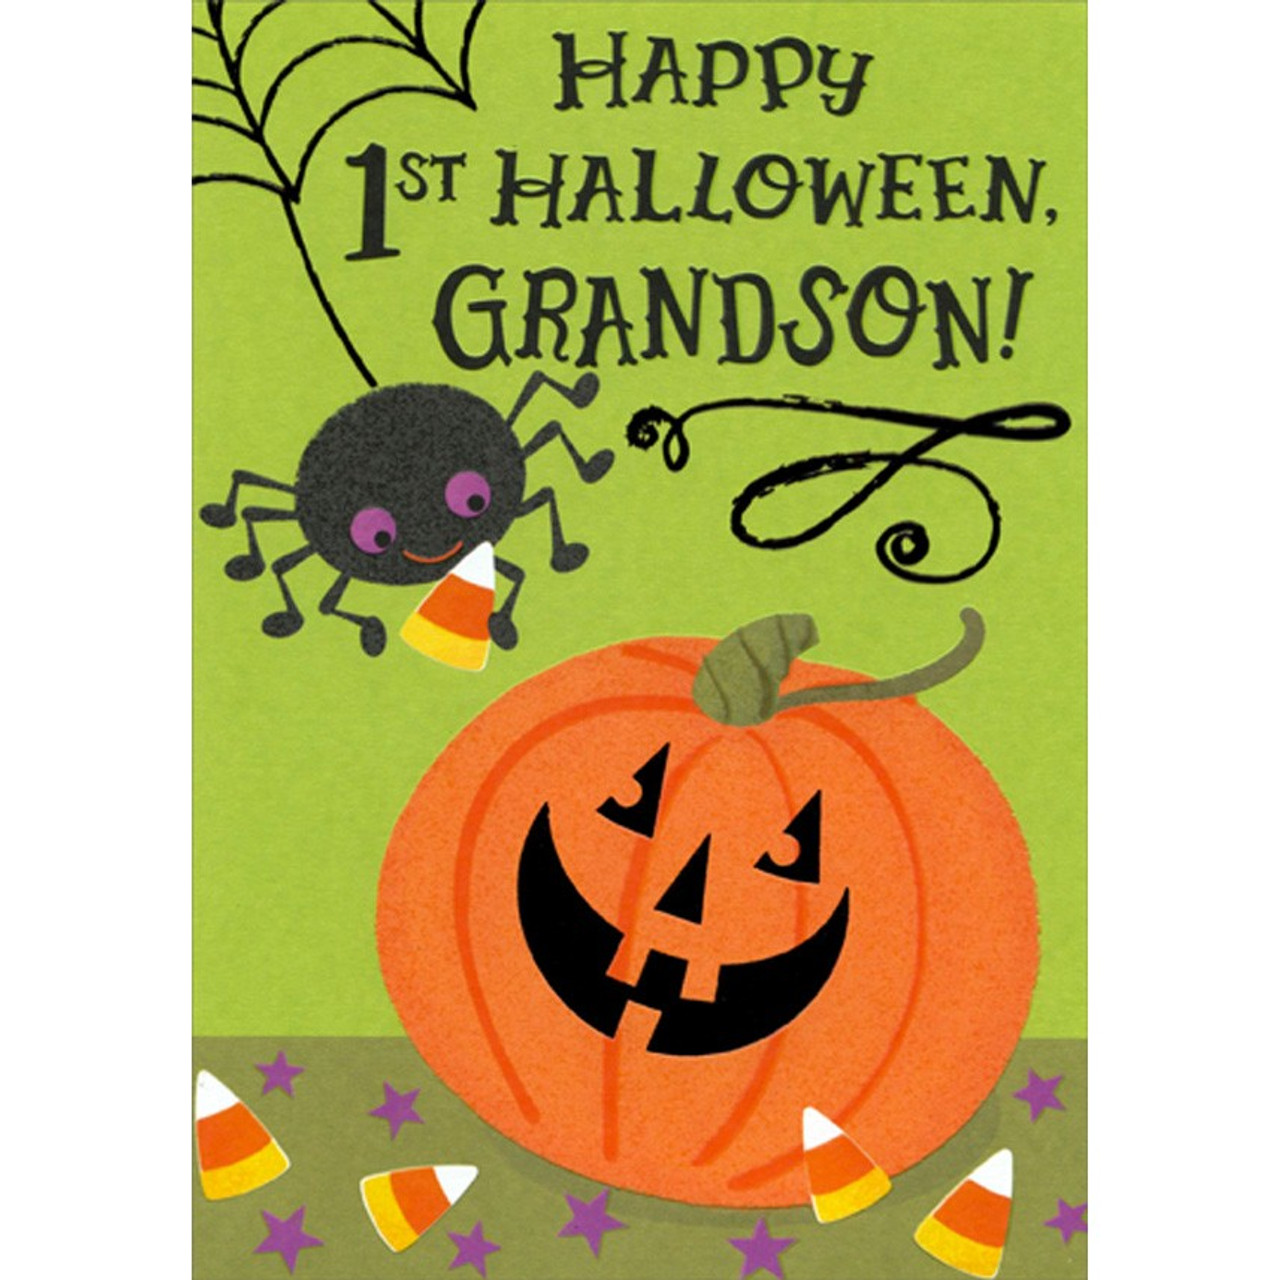 Corn　Pumpkin　Holding　for　Card　Smiling　Baby's　Halloween　Grandson　1st　First　Candy　Spider　Cute　and